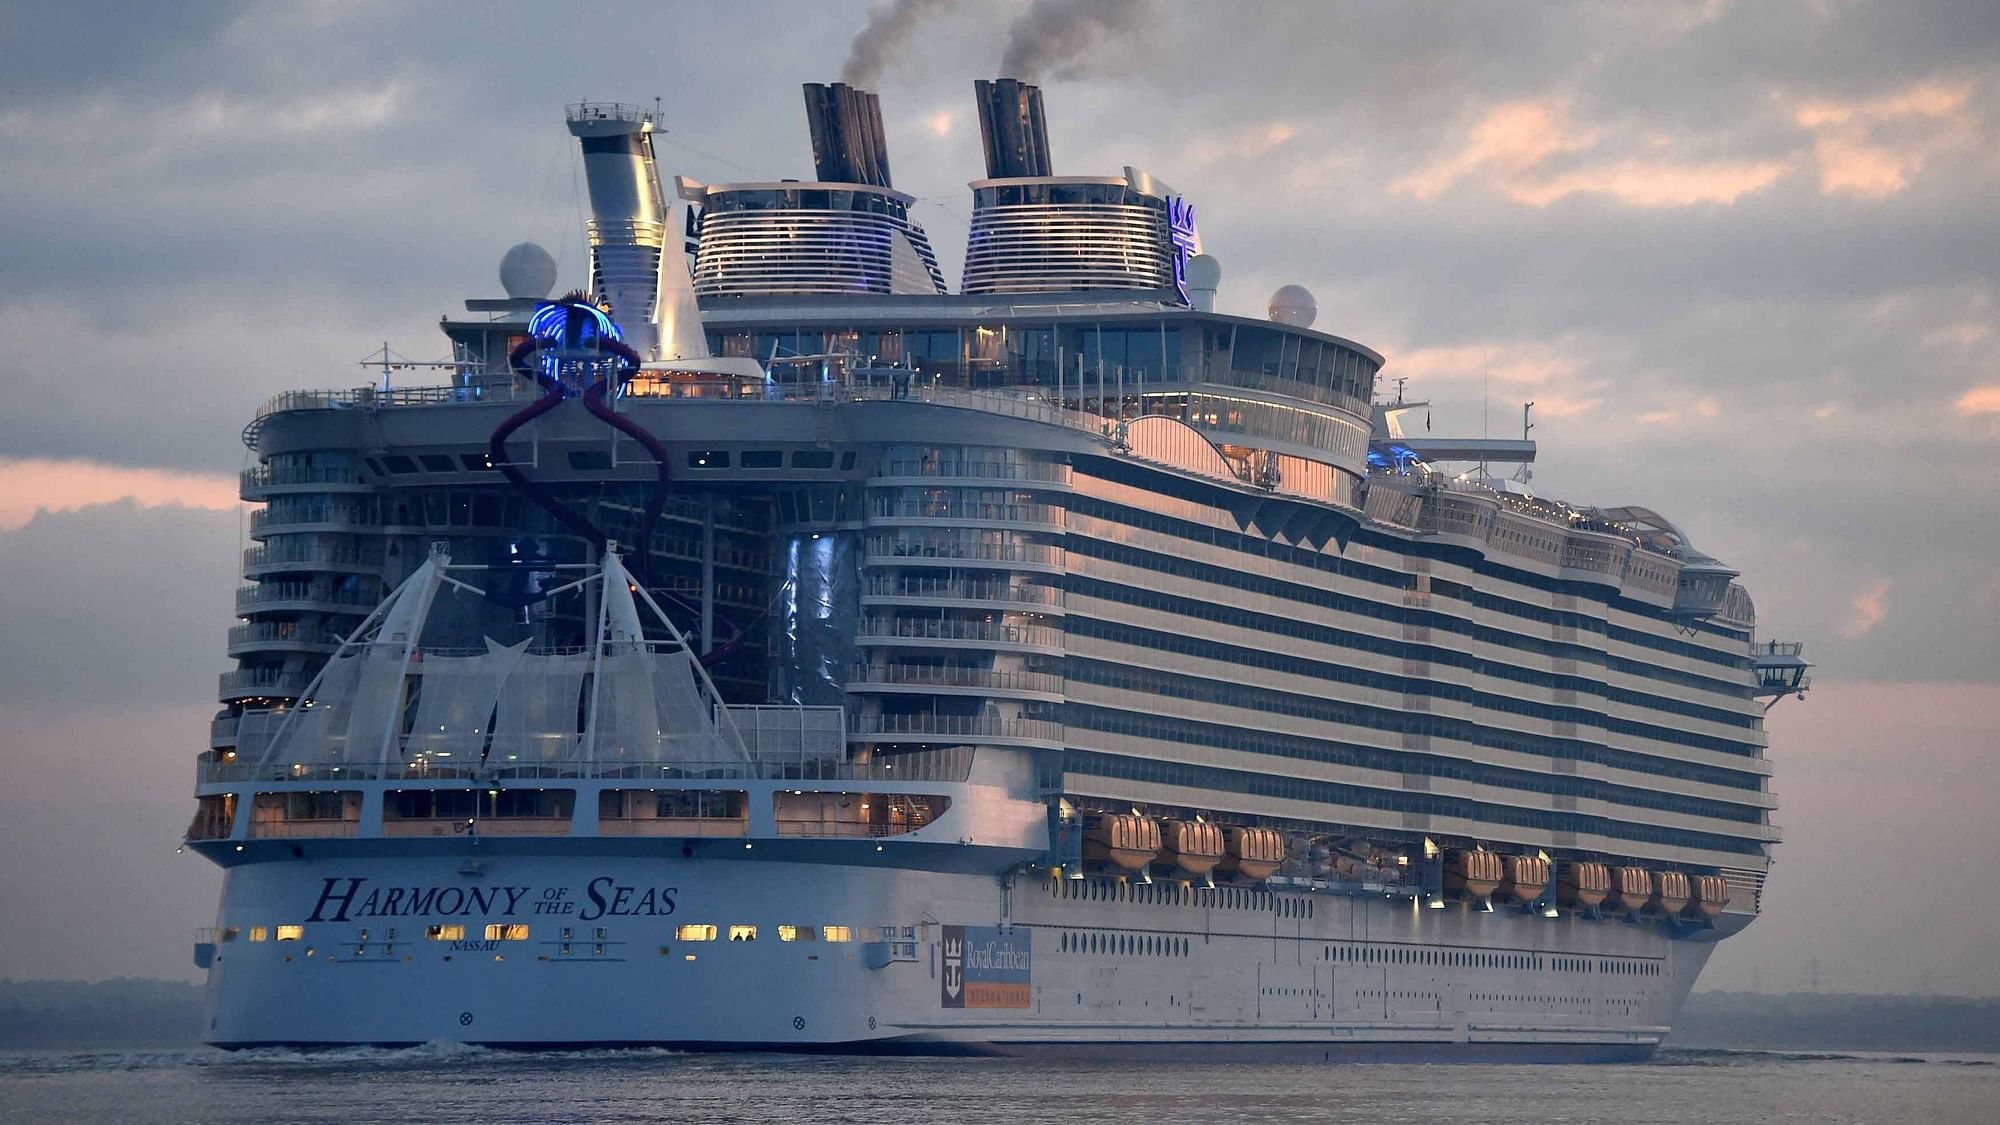 Britain’s luxury liner Harmony of the Seas to make its maiden voyage trip on 1 June. (Photo: AP)